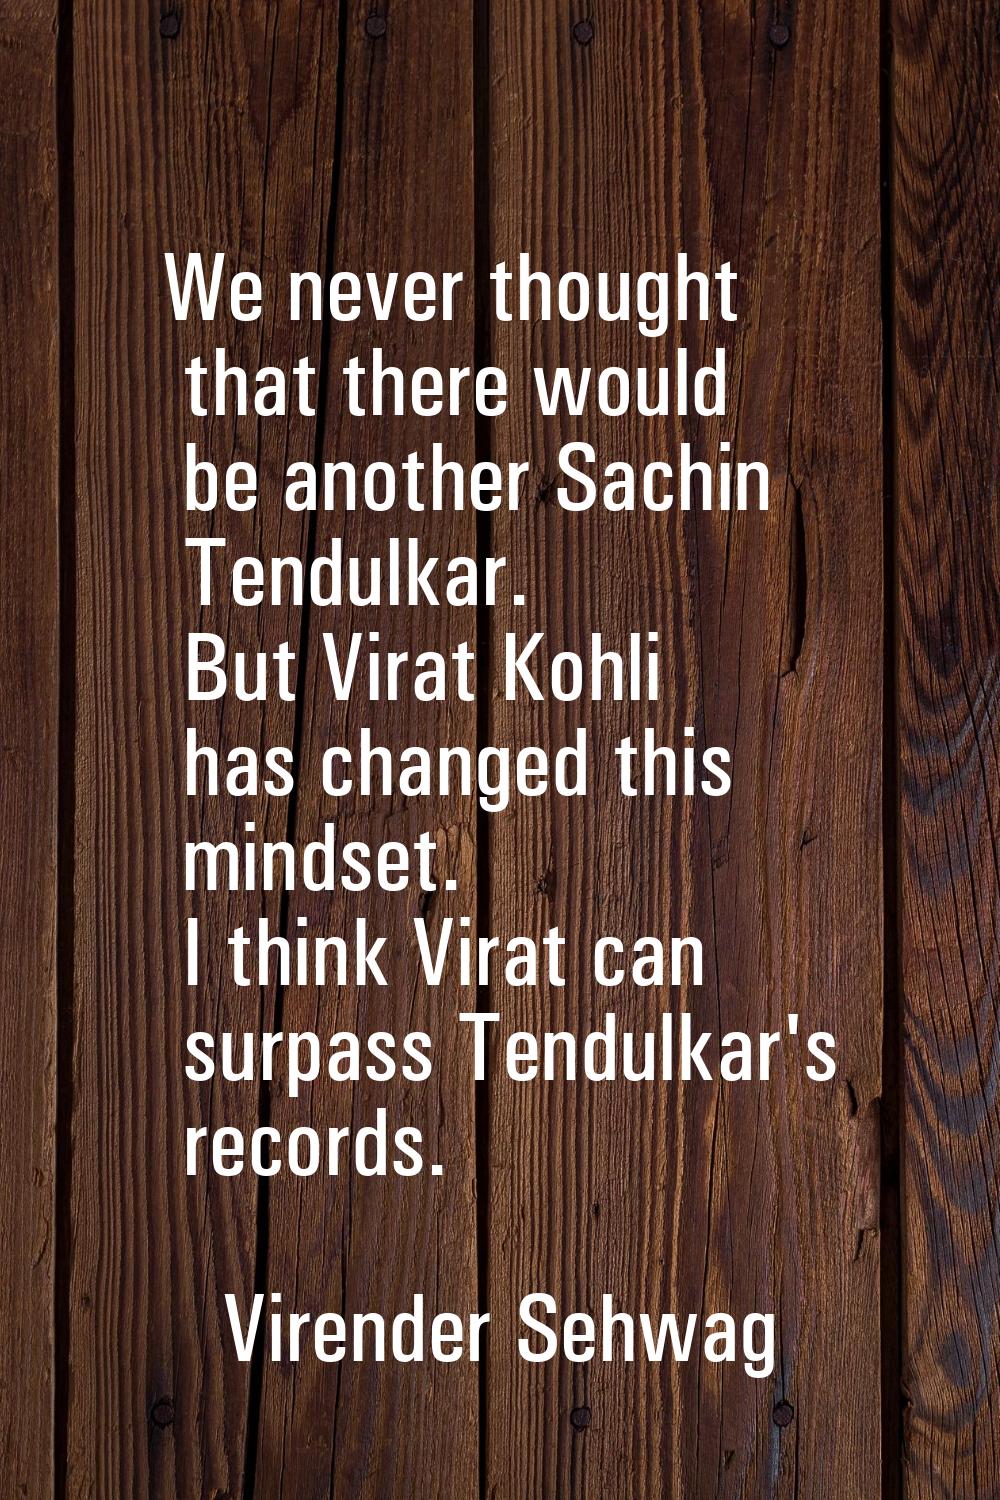 We never thought that there would be another Sachin Tendulkar. But Virat Kohli has changed this min